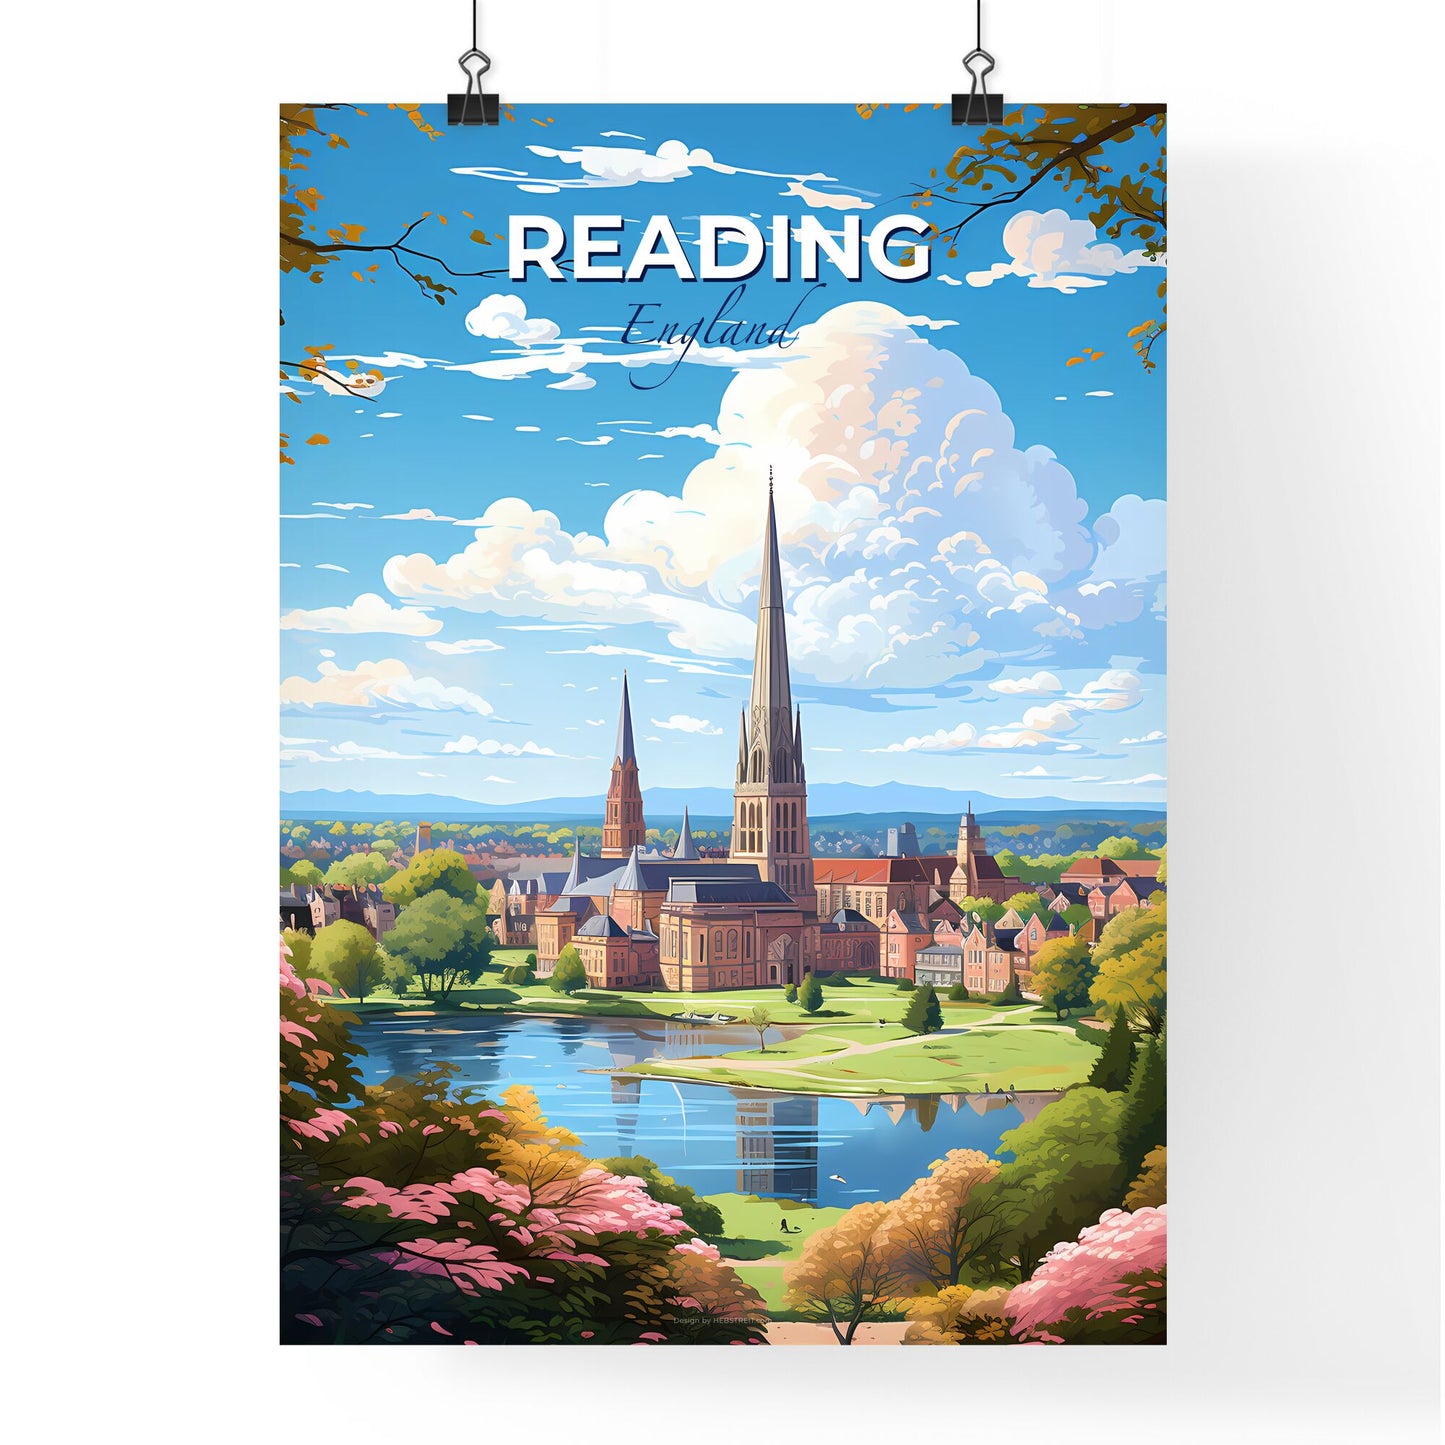 Reading England Skyline - A City With A Lake And Trees - Customizable Travel Gift Default Title